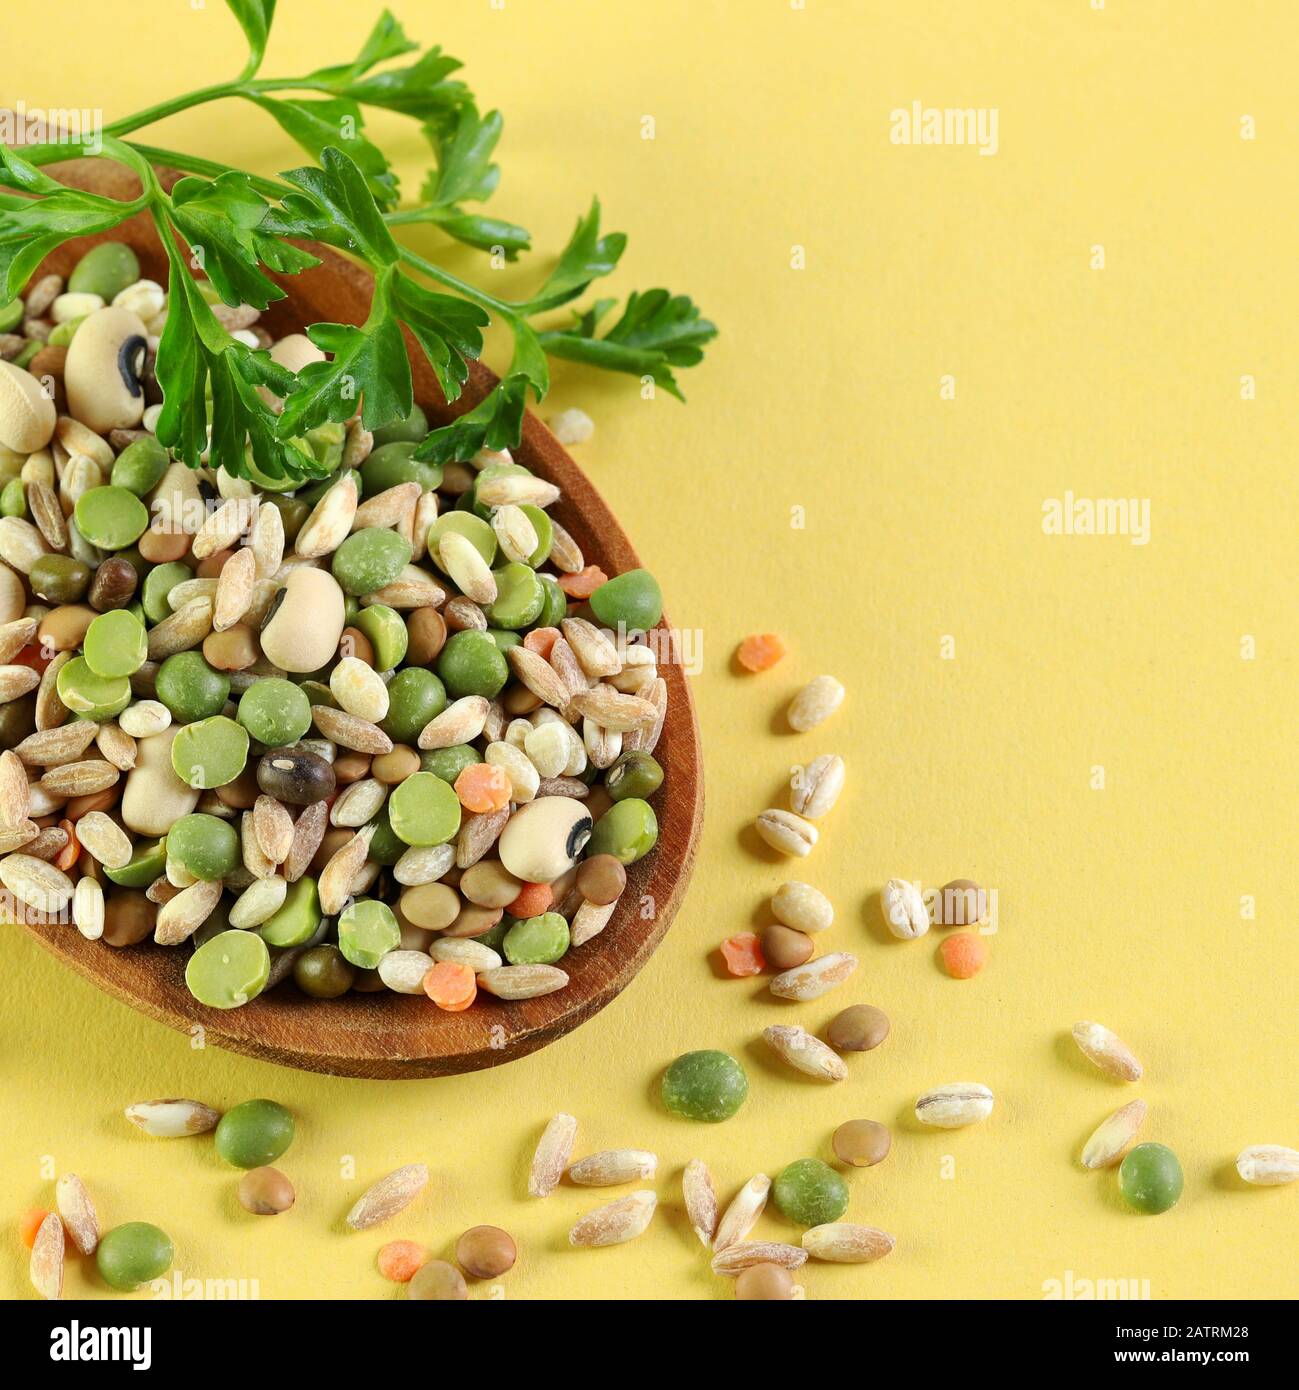 Mix of dried legumes in a wooden spoon isolated on yellow background. Top view. Stock Photo